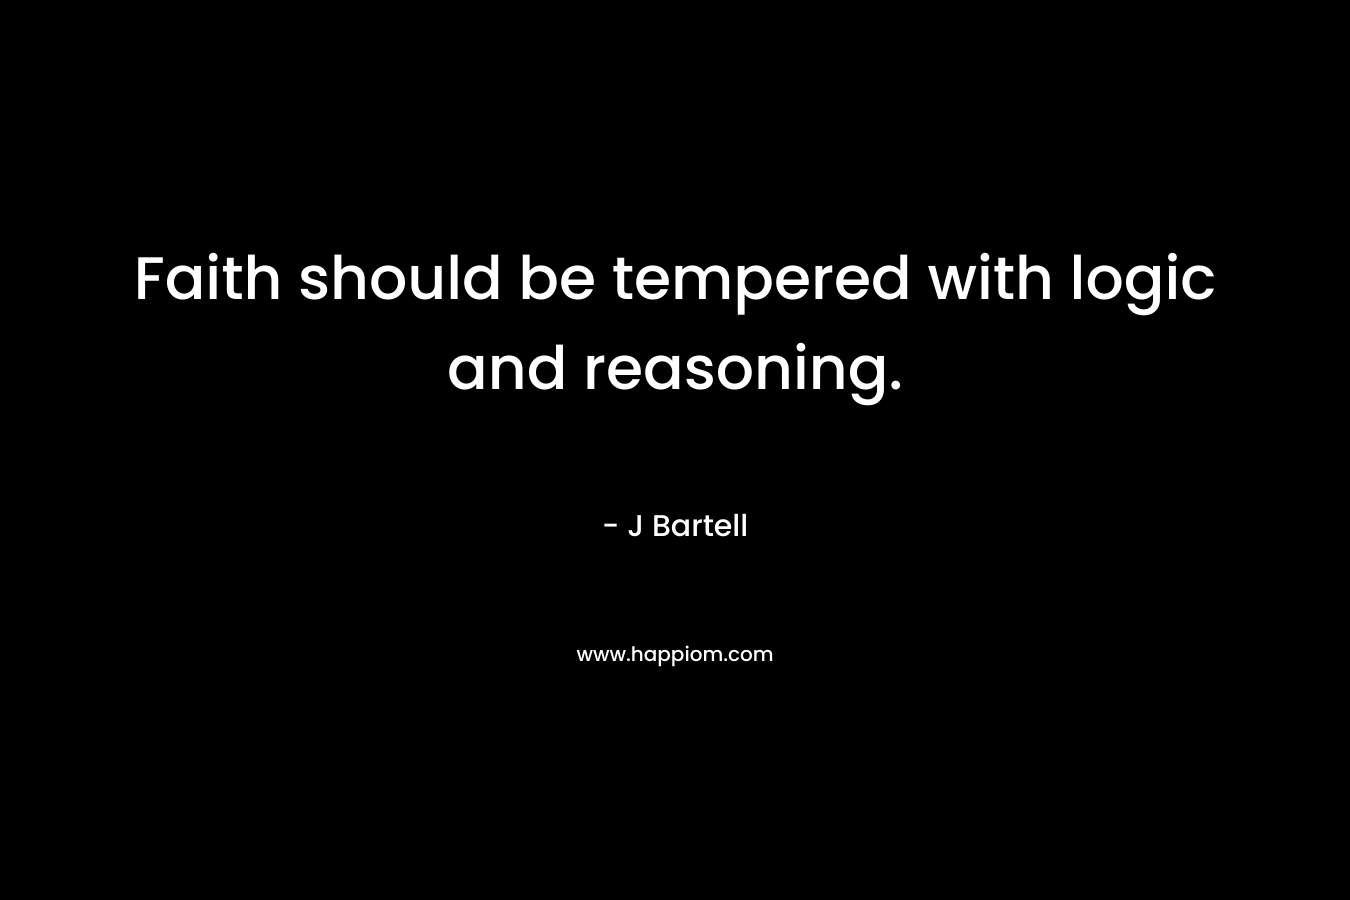 Faith should be tempered with logic and reasoning. – J Bartell